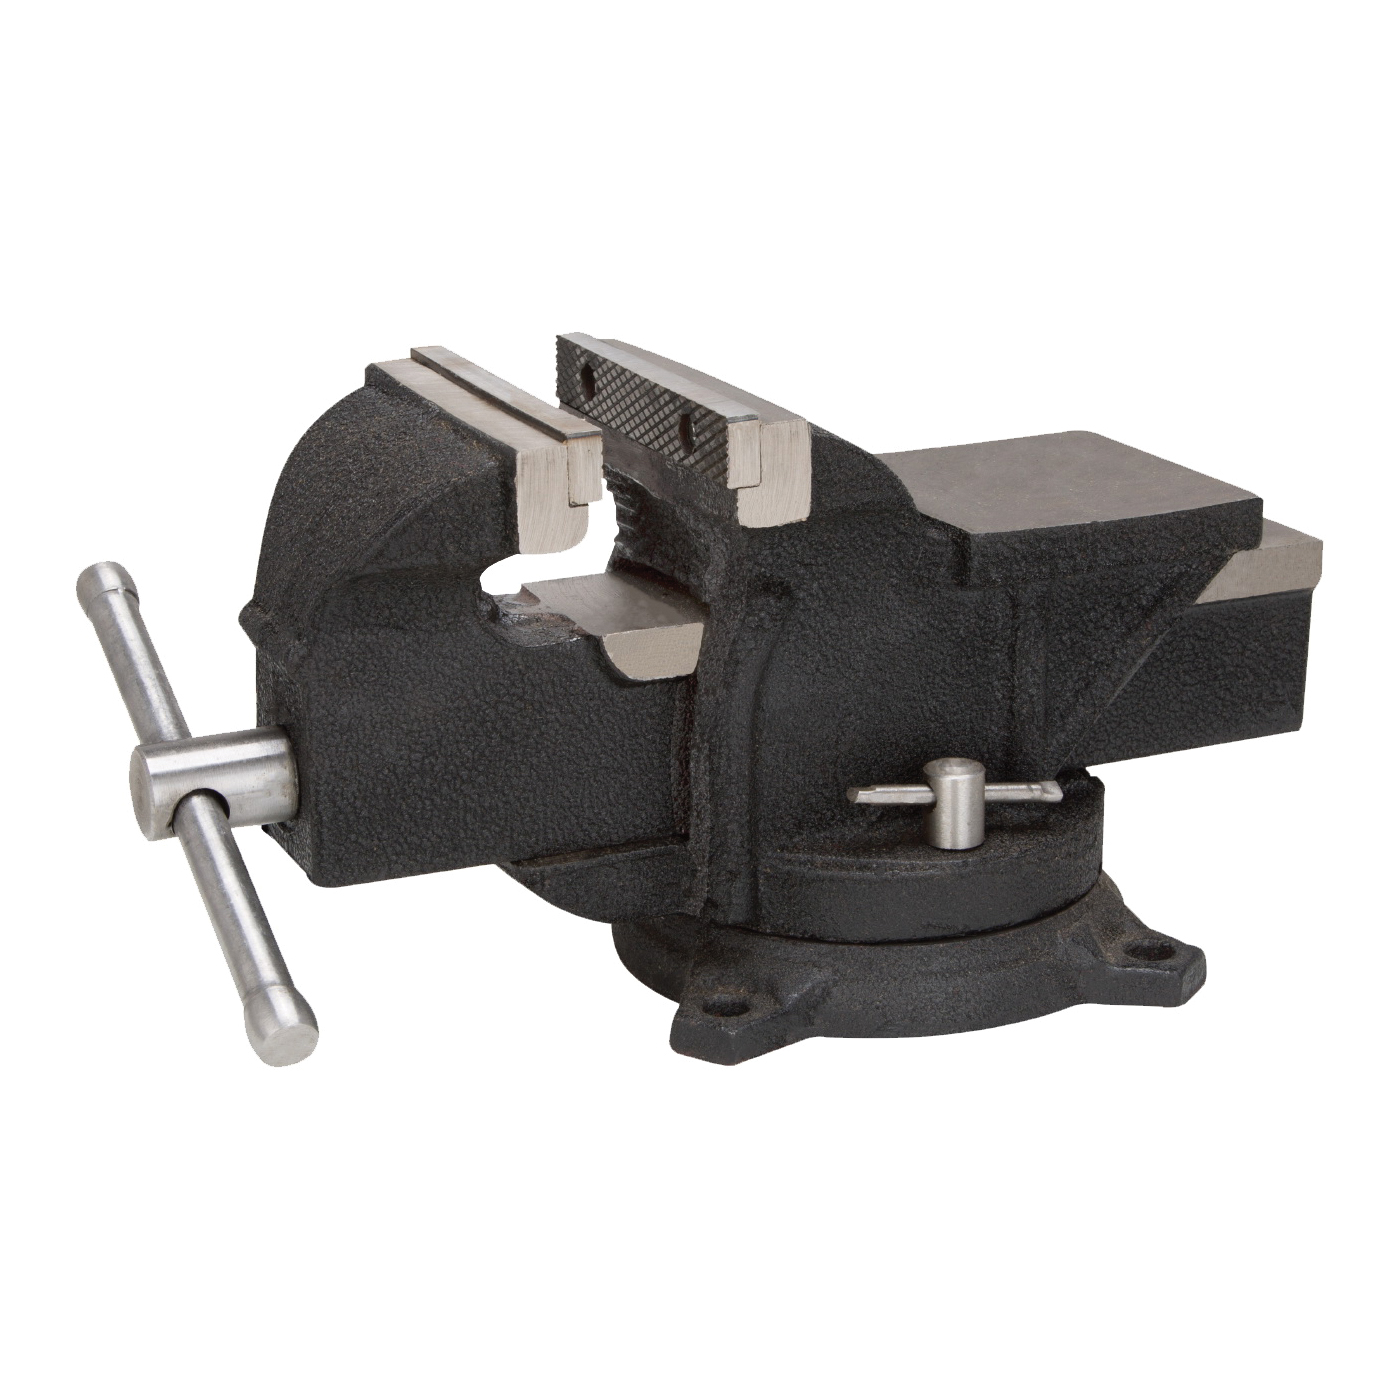 JL25012 Bench Vise, 5 in Jaw Opening, 3/8 in W Jaw, 2.5 in D Throat, Cast Iron Steel, Serrated Jaw